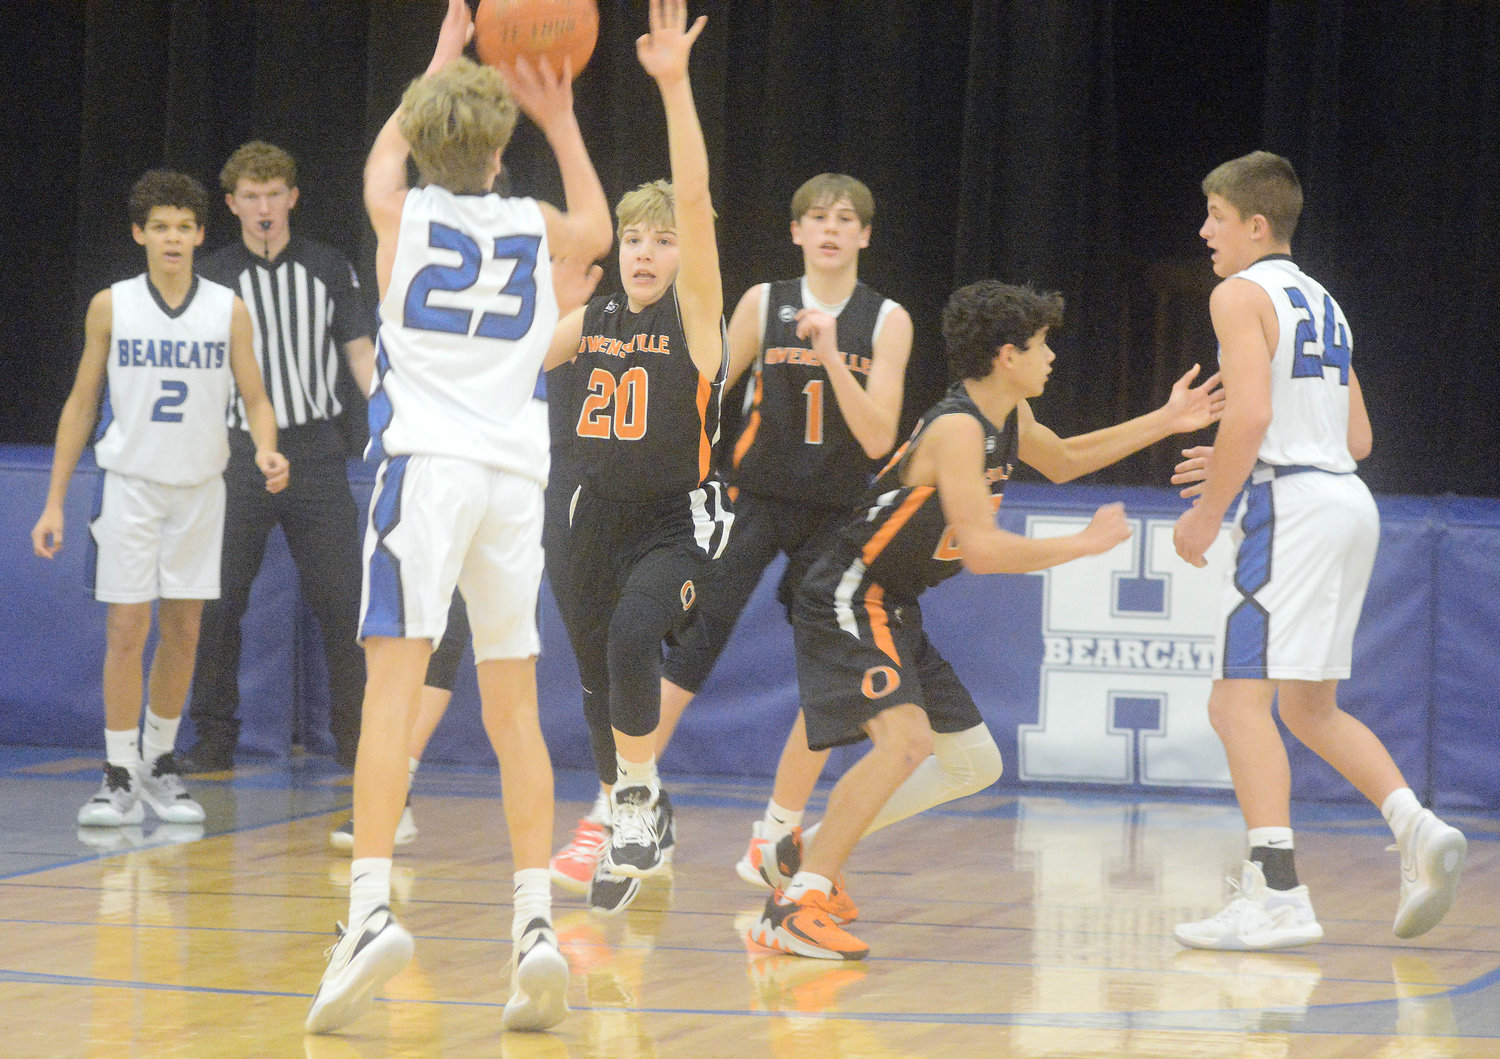 Ryker Ash (center) takes a shot for Hermann while Owensville’s Wyatt Lewis (20) gets a hand up looking to contest the shot during Monday night basketball action at Hermann Middle School.